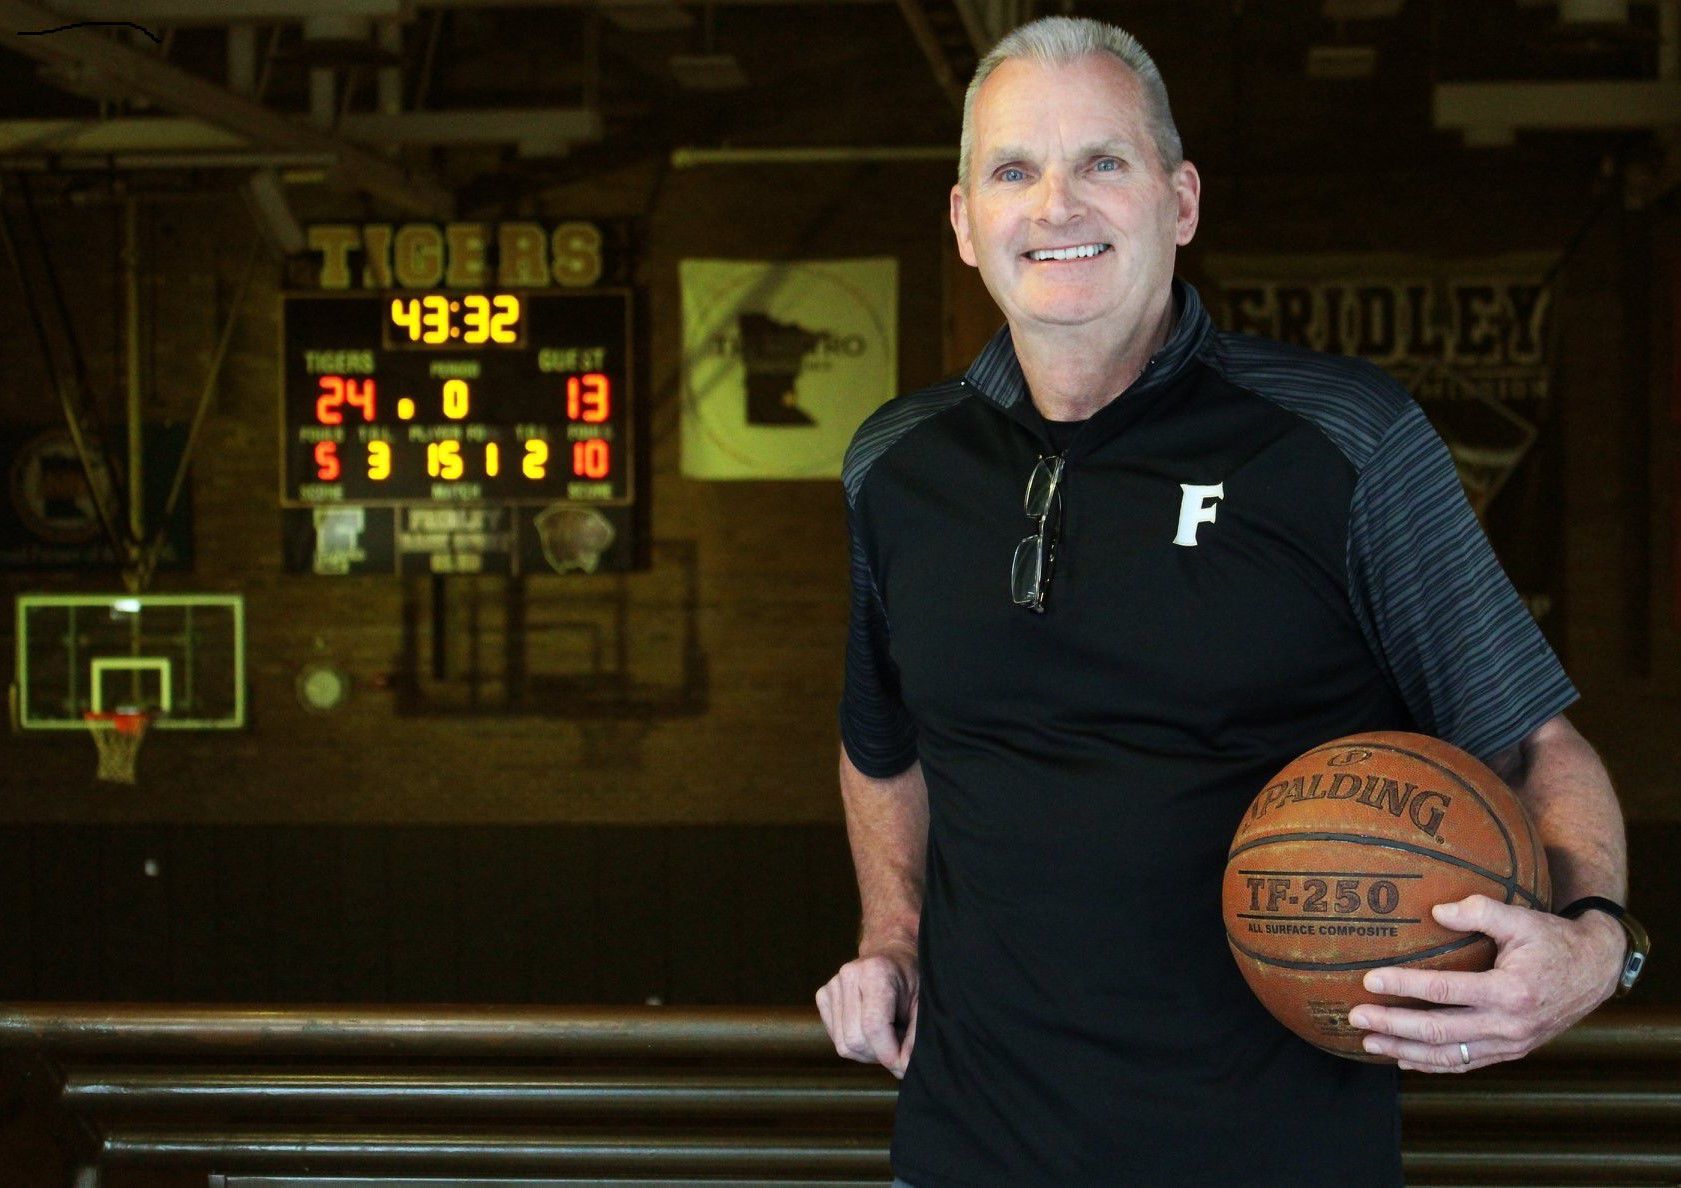 Basketball: Fridley's MacDonald to be inducted into MN Basketball